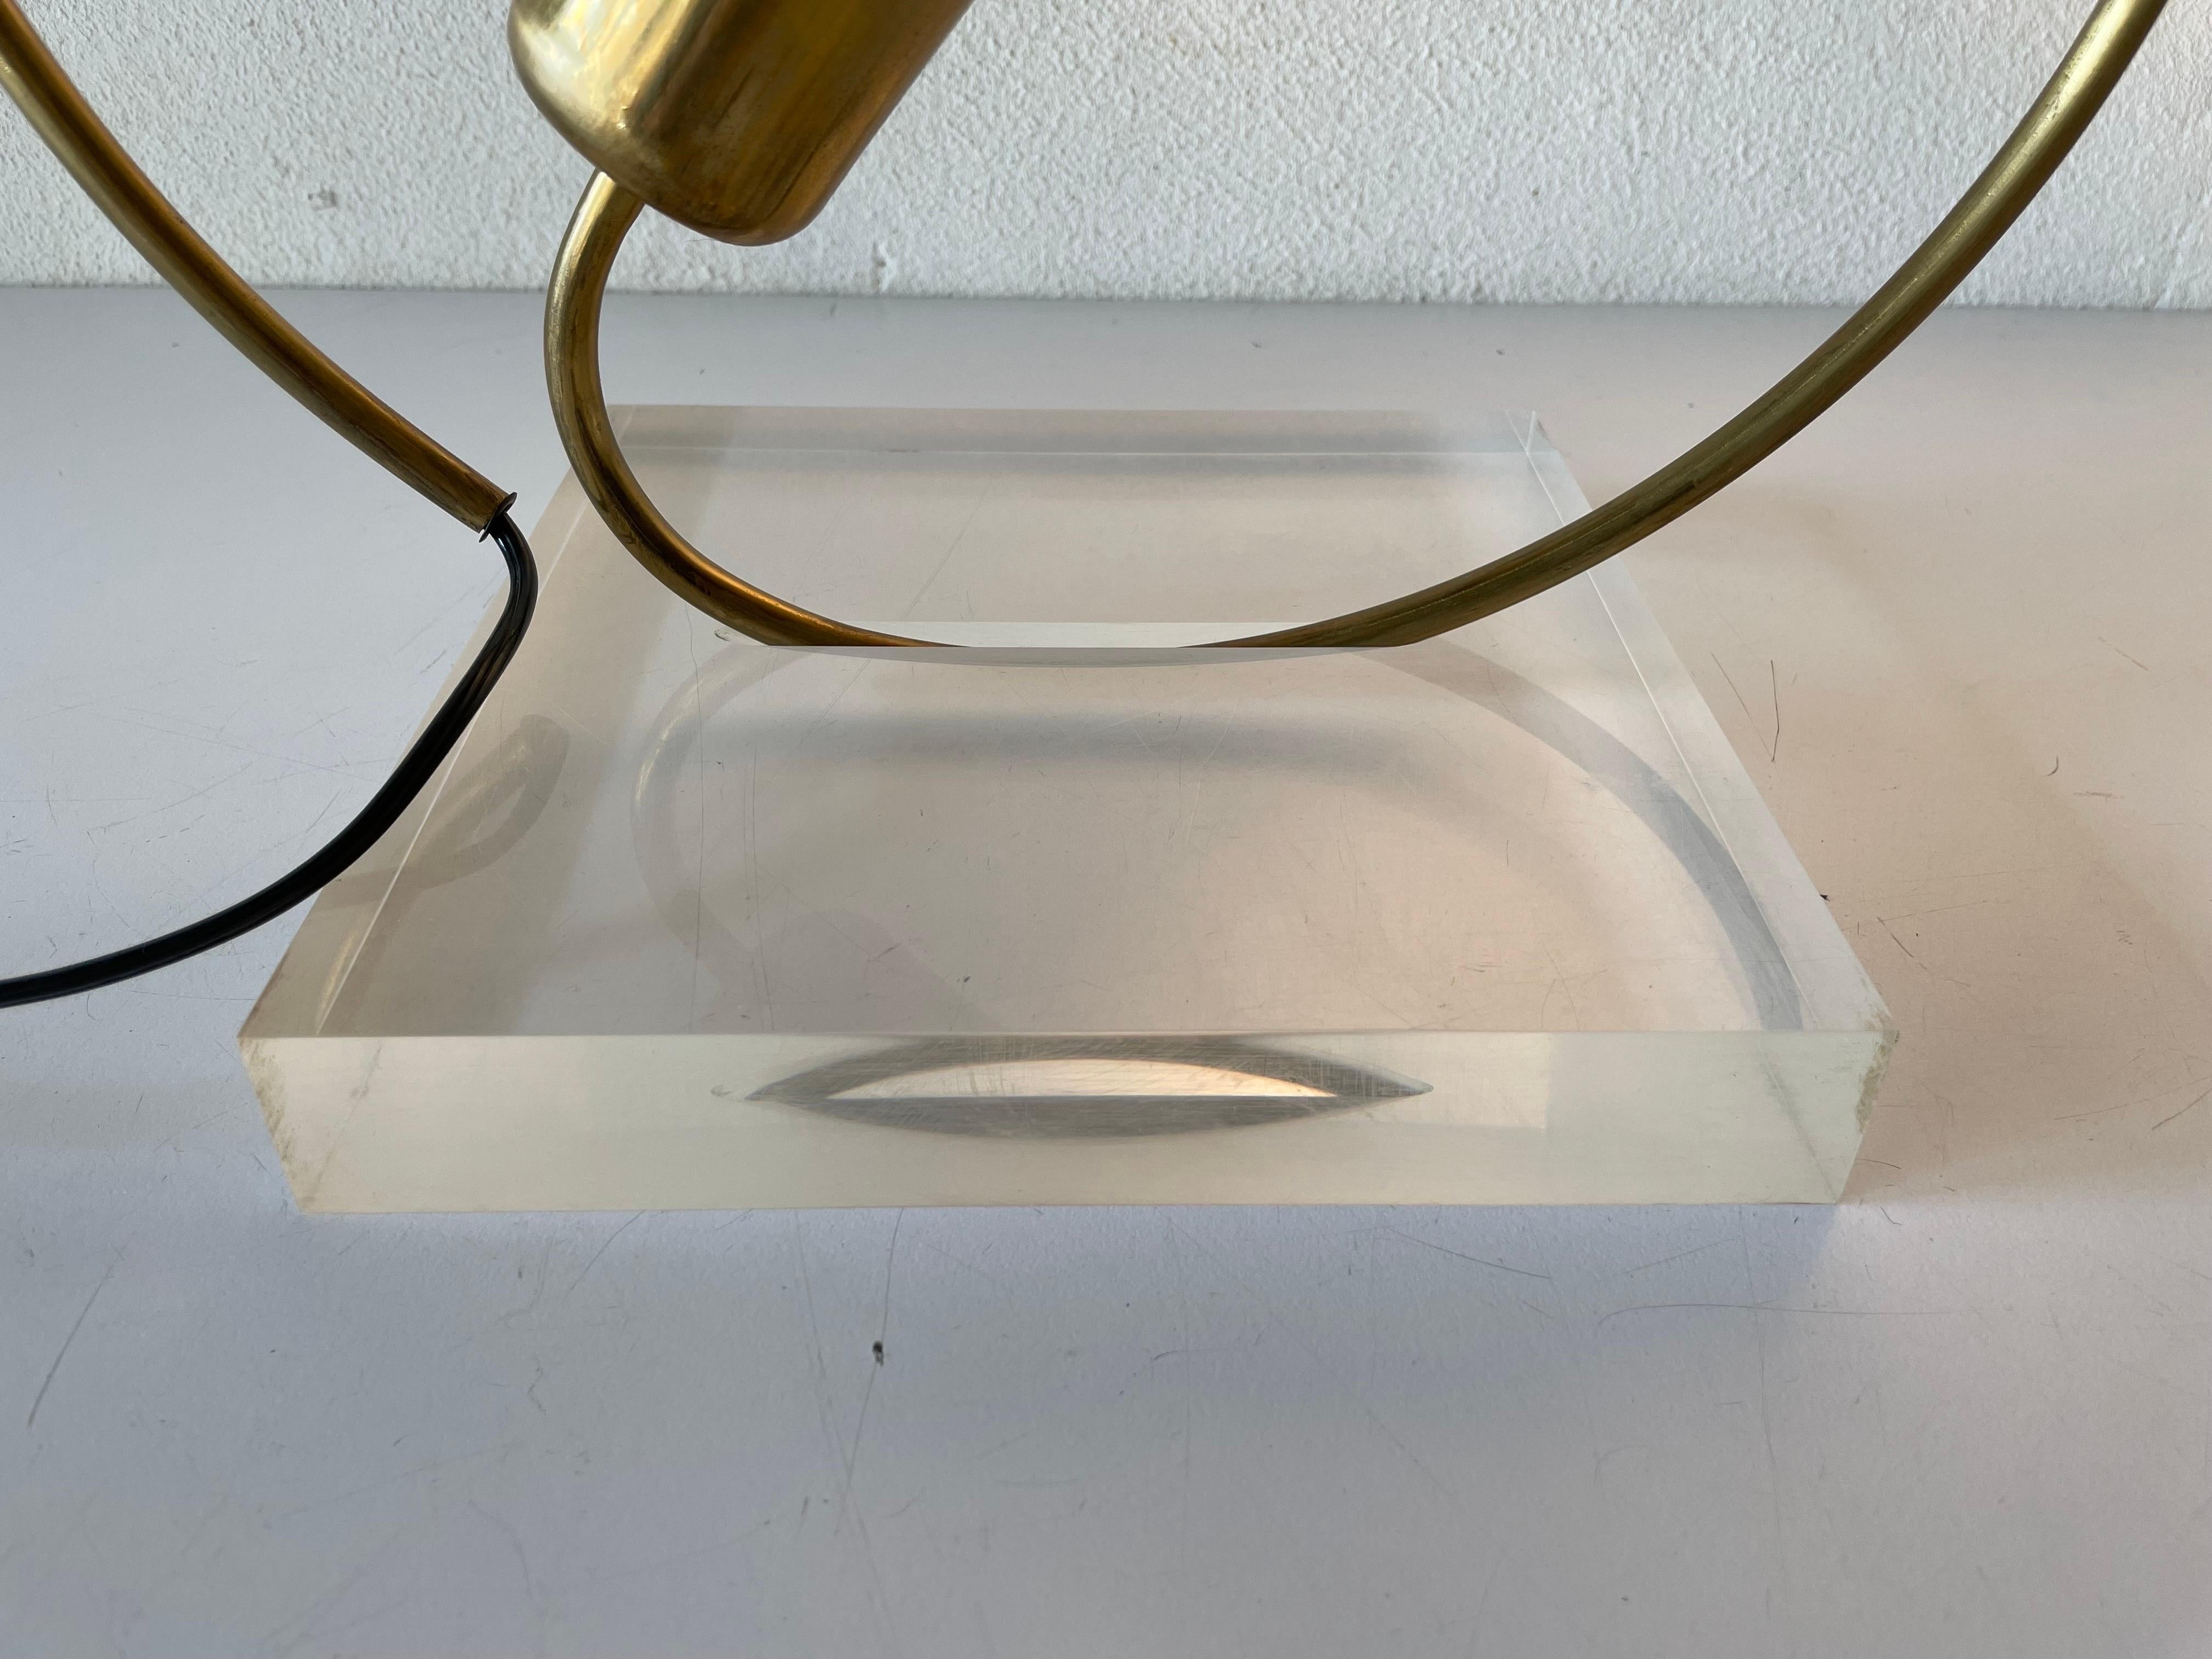 Brass & Lucite Trumpet Design Table Lamp, 1960s, Italy For Sale 8